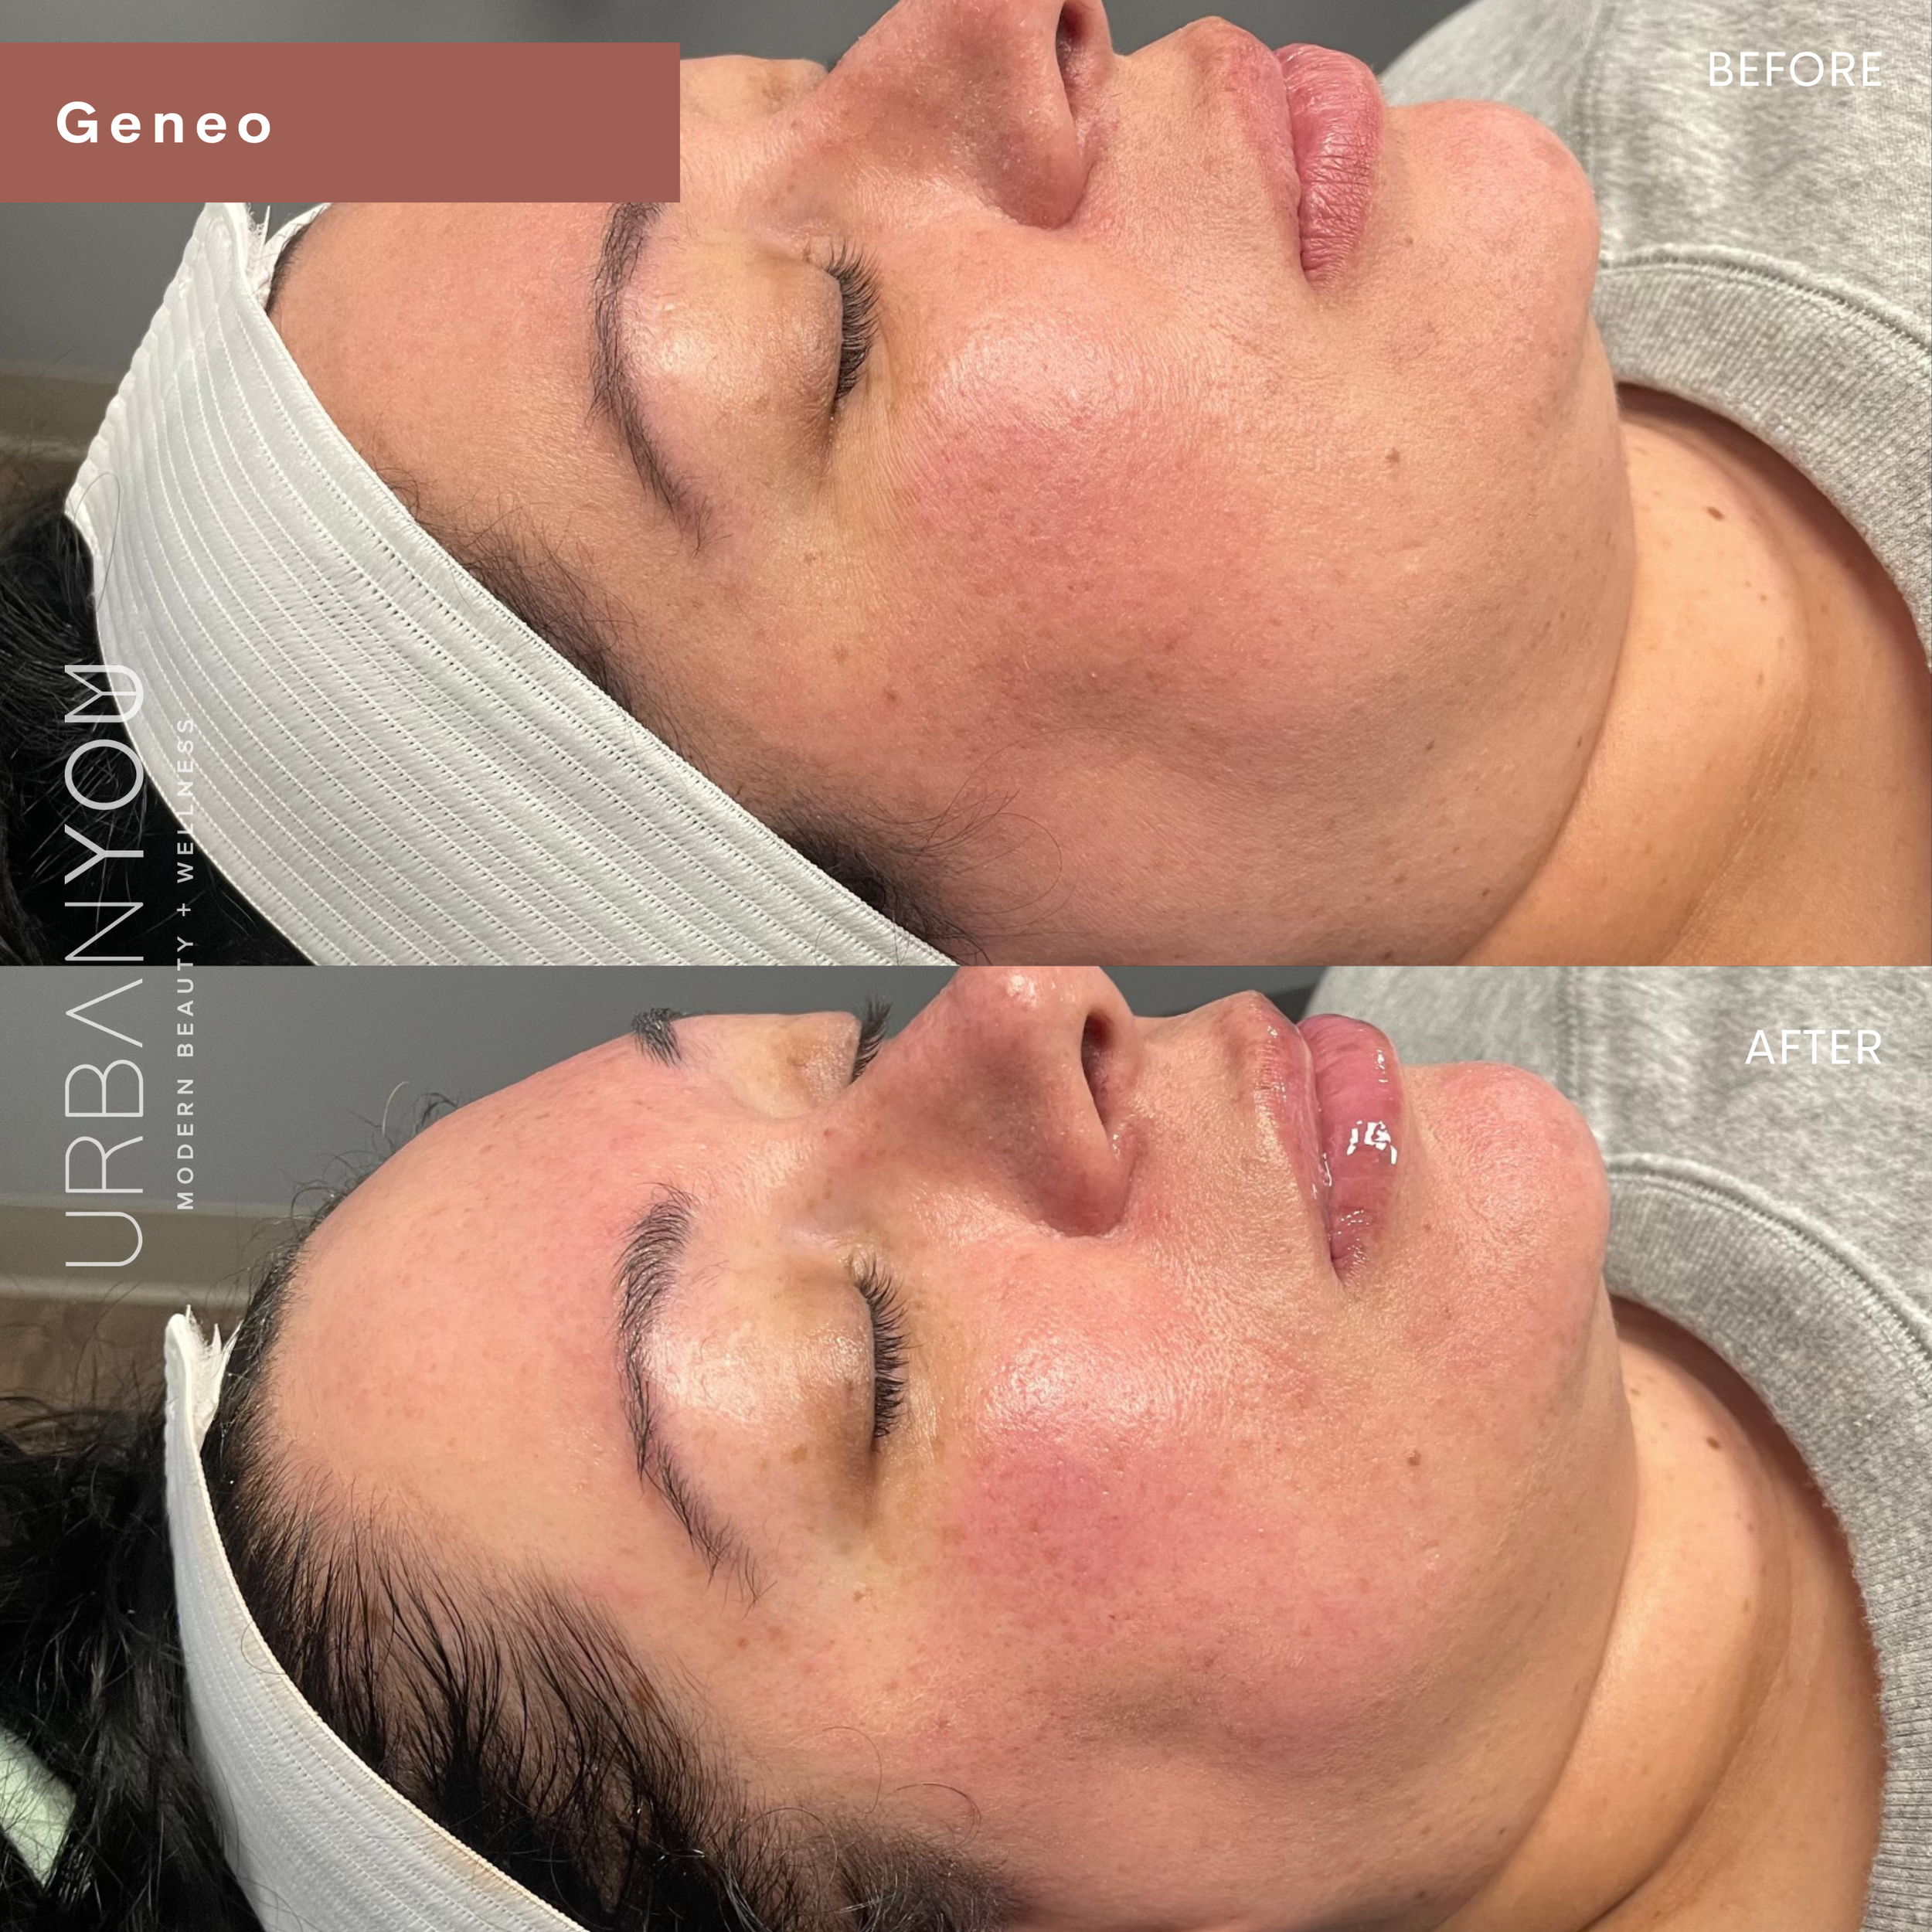 Glo2Facial / OxyGeneo before and after photo at Urban You medical spa (Copy)